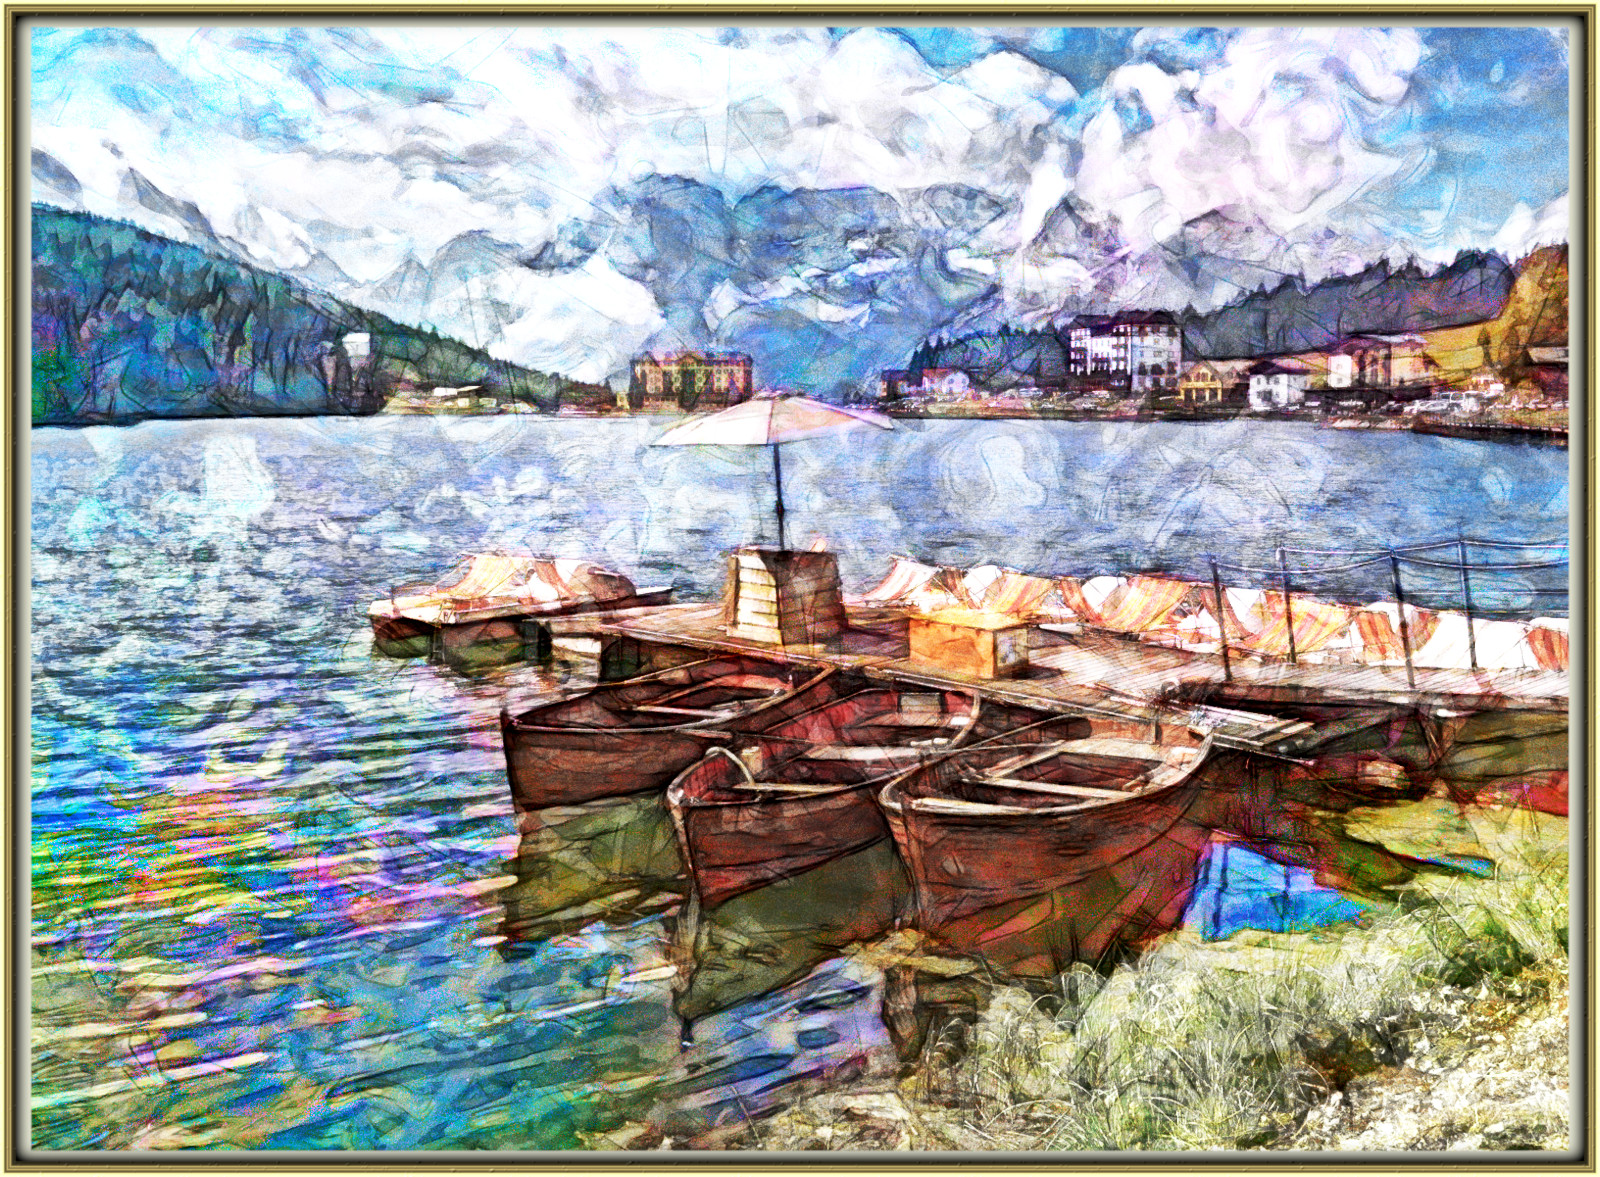 2024-01-21 08-03-24 boats_by_sergiba_dgk6r1m-fullview with a WaterSketch Effect 2024 (100.0,12.0,100.0,0.0,0,2.0,-1.0,6-1.0,4,0).jpeg